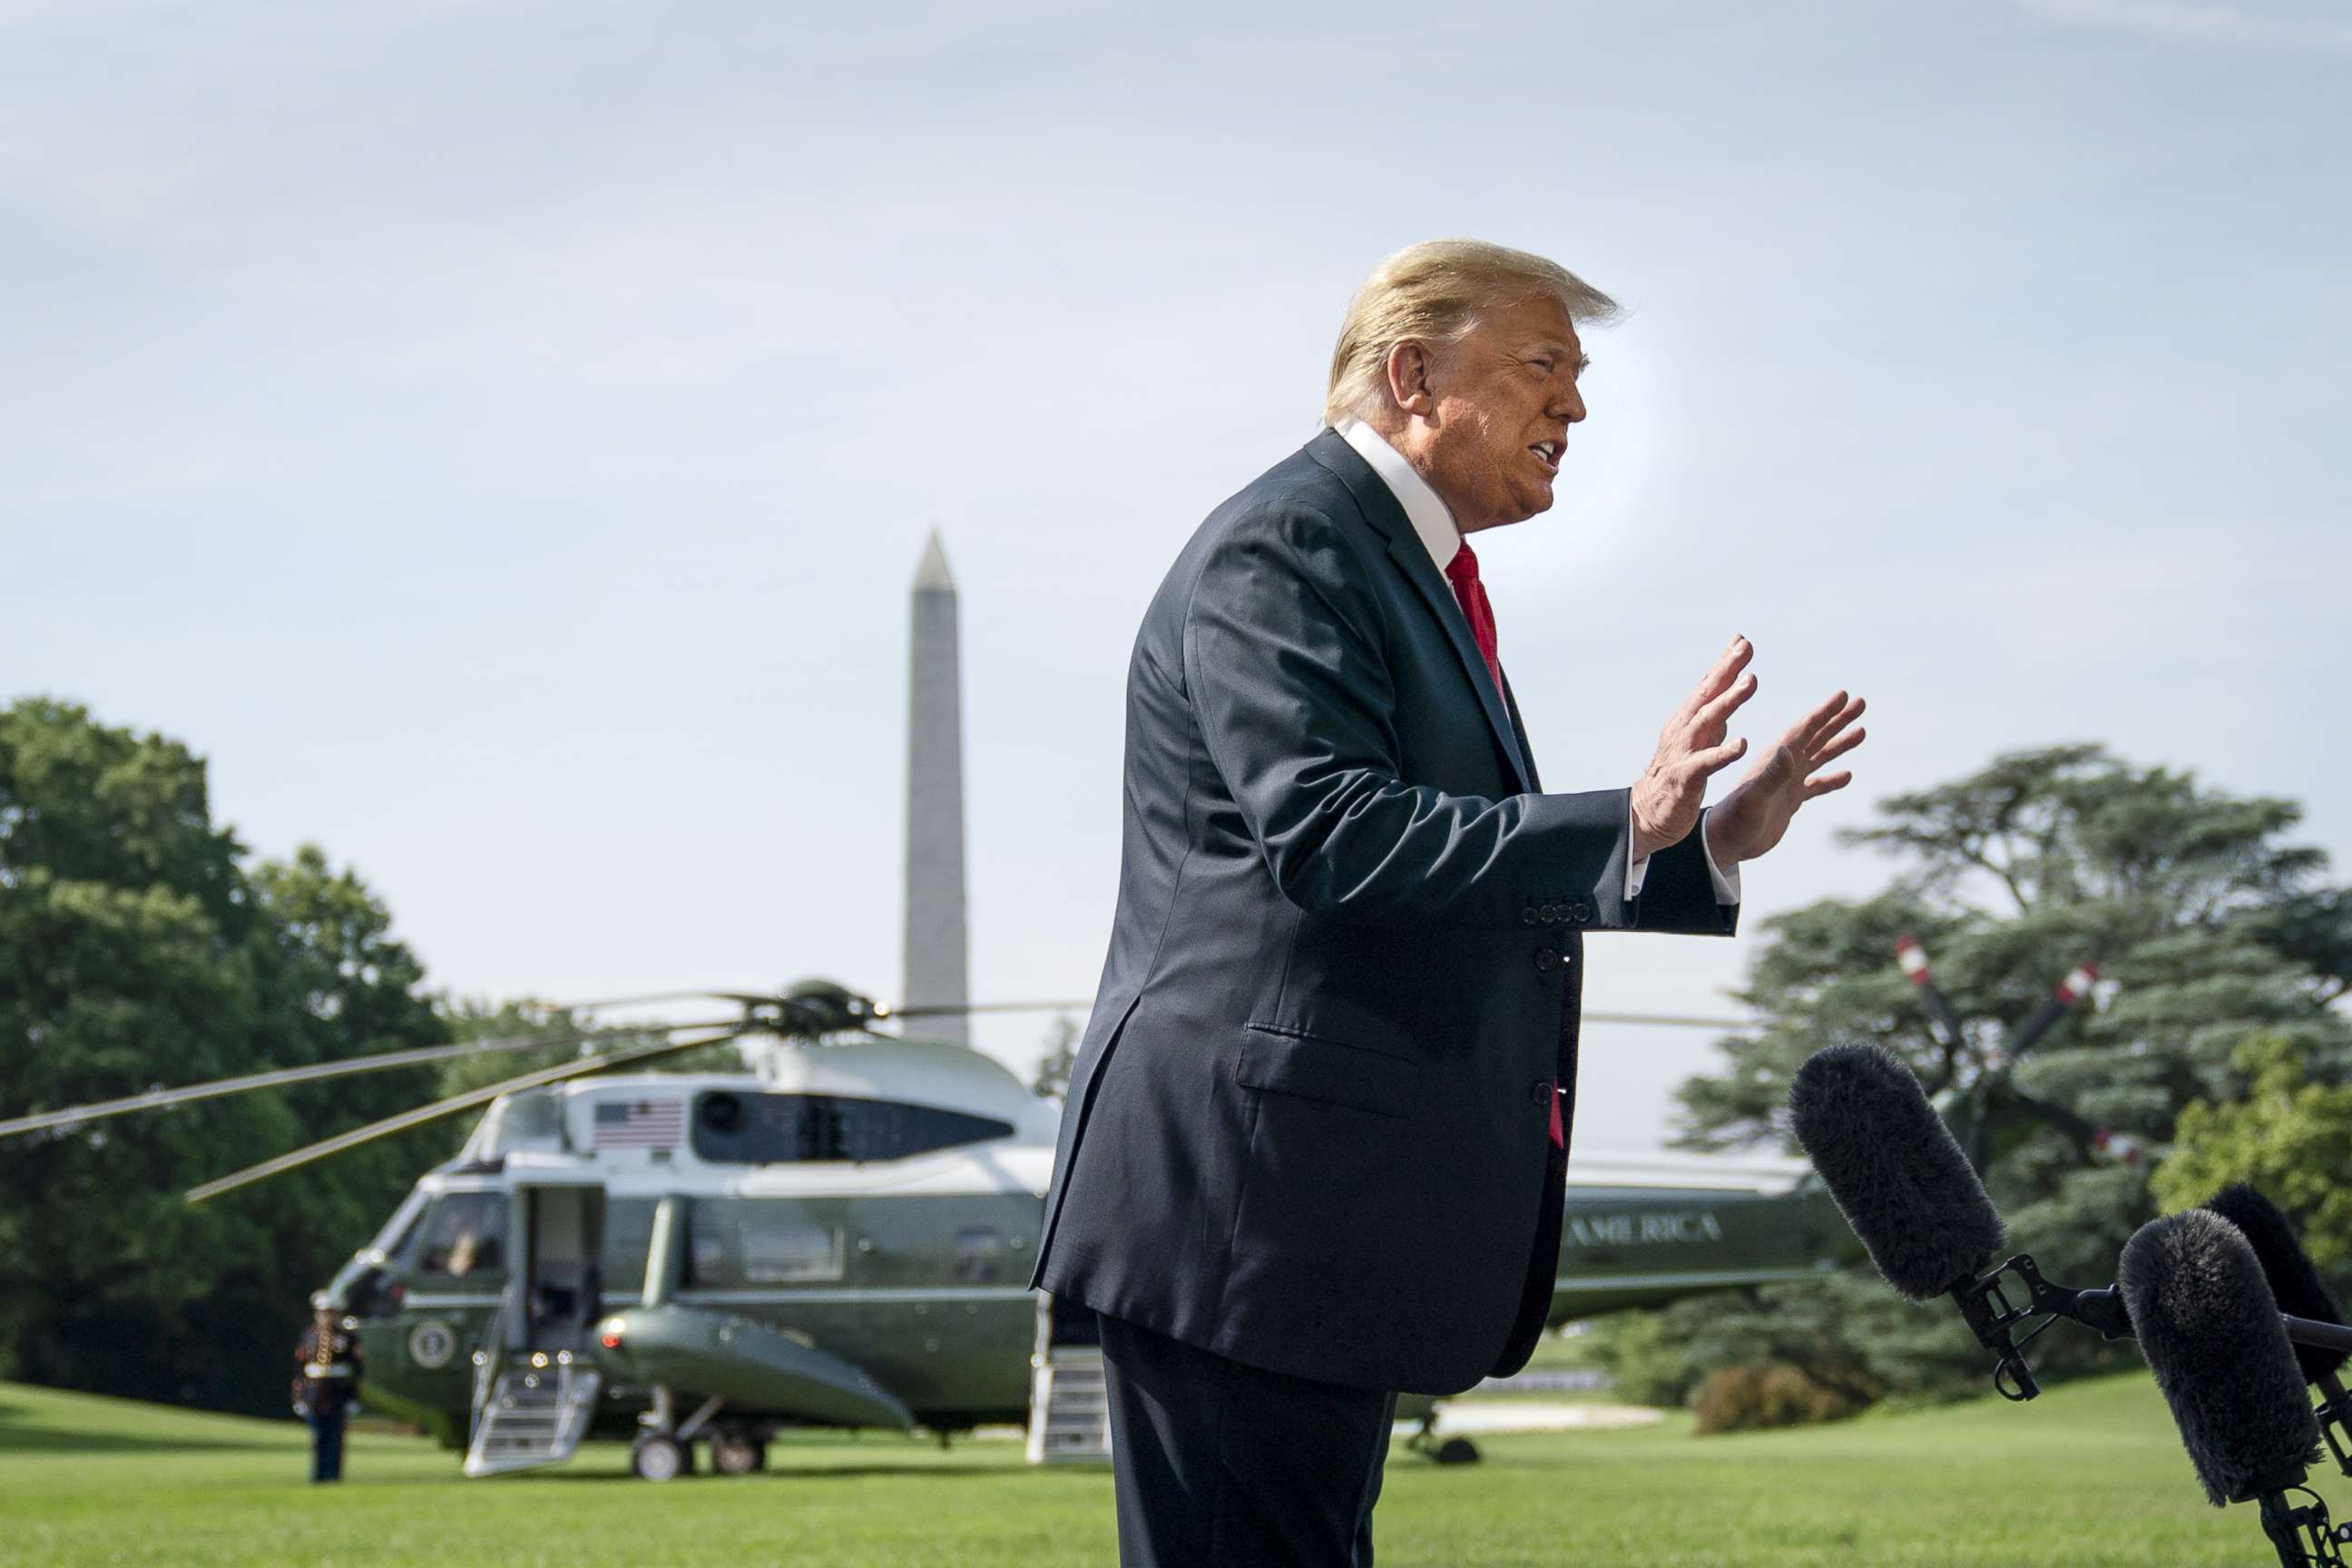 PHOTO: President Donald Trump speaks to reporters before boarding Marine One on the South Lawn of the White House, June 23, 2020 to travel to Arizona.